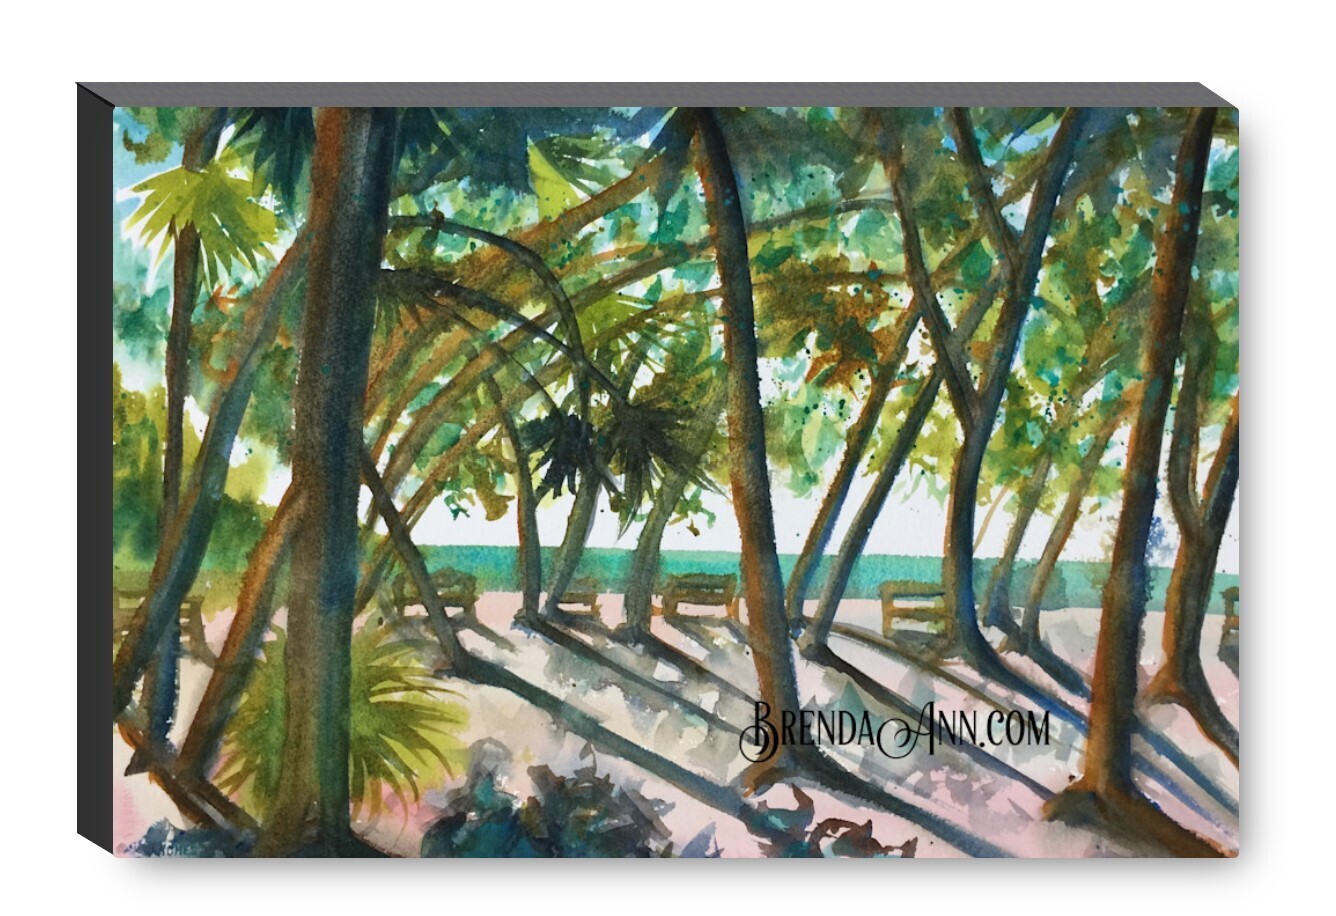 Fort Zachary Taylor State Park Key West Canvas Gallery Wrapped Print - Watercolor Art - Ready to hang on a wall